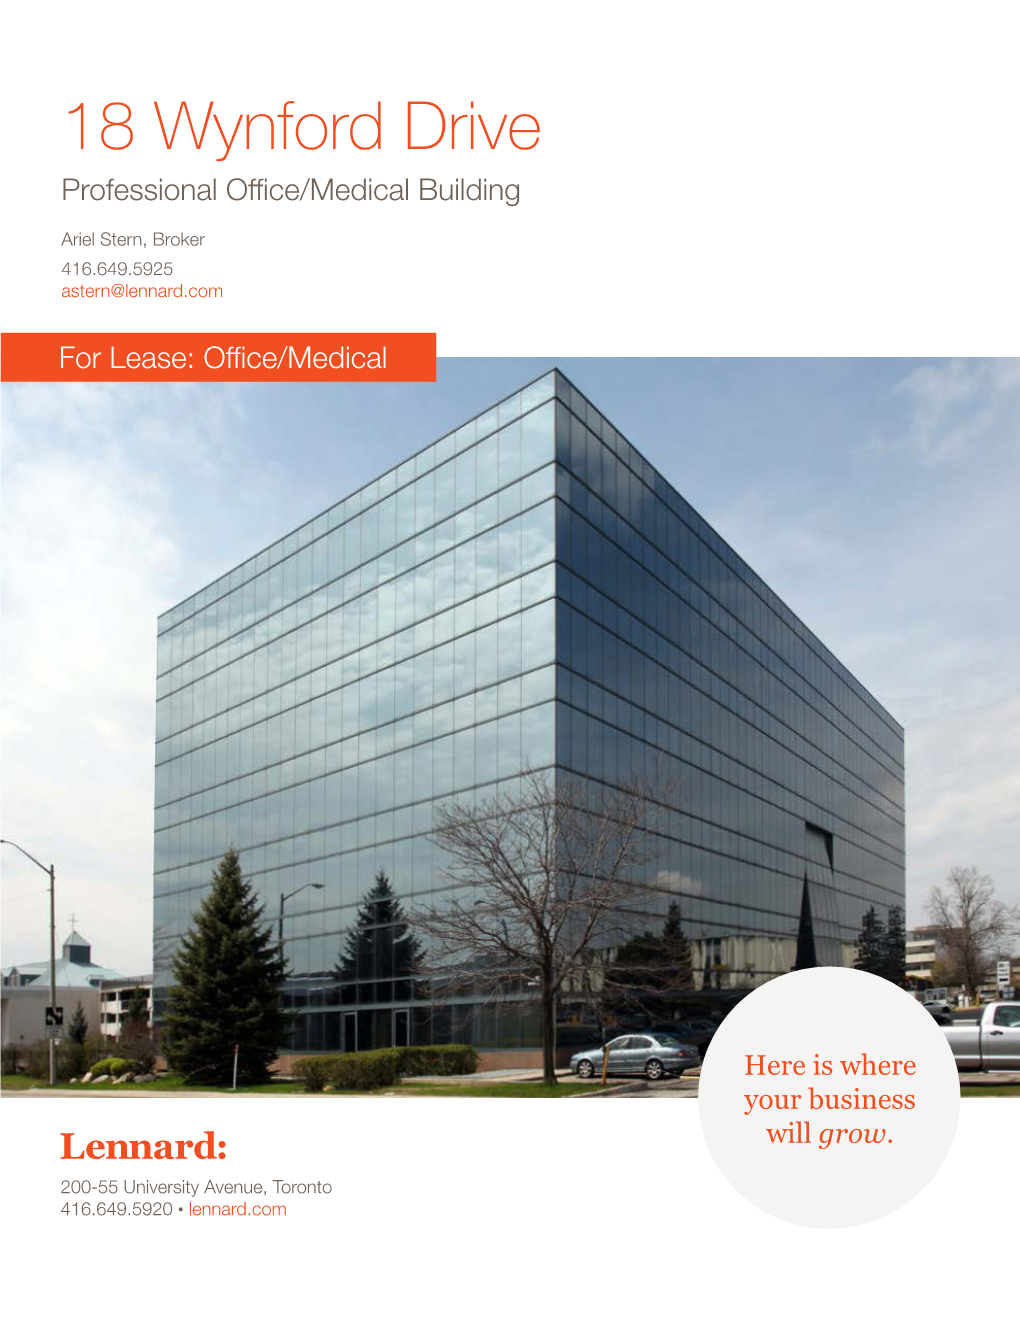 18 Wynford Drive Professional Office/Medical Building